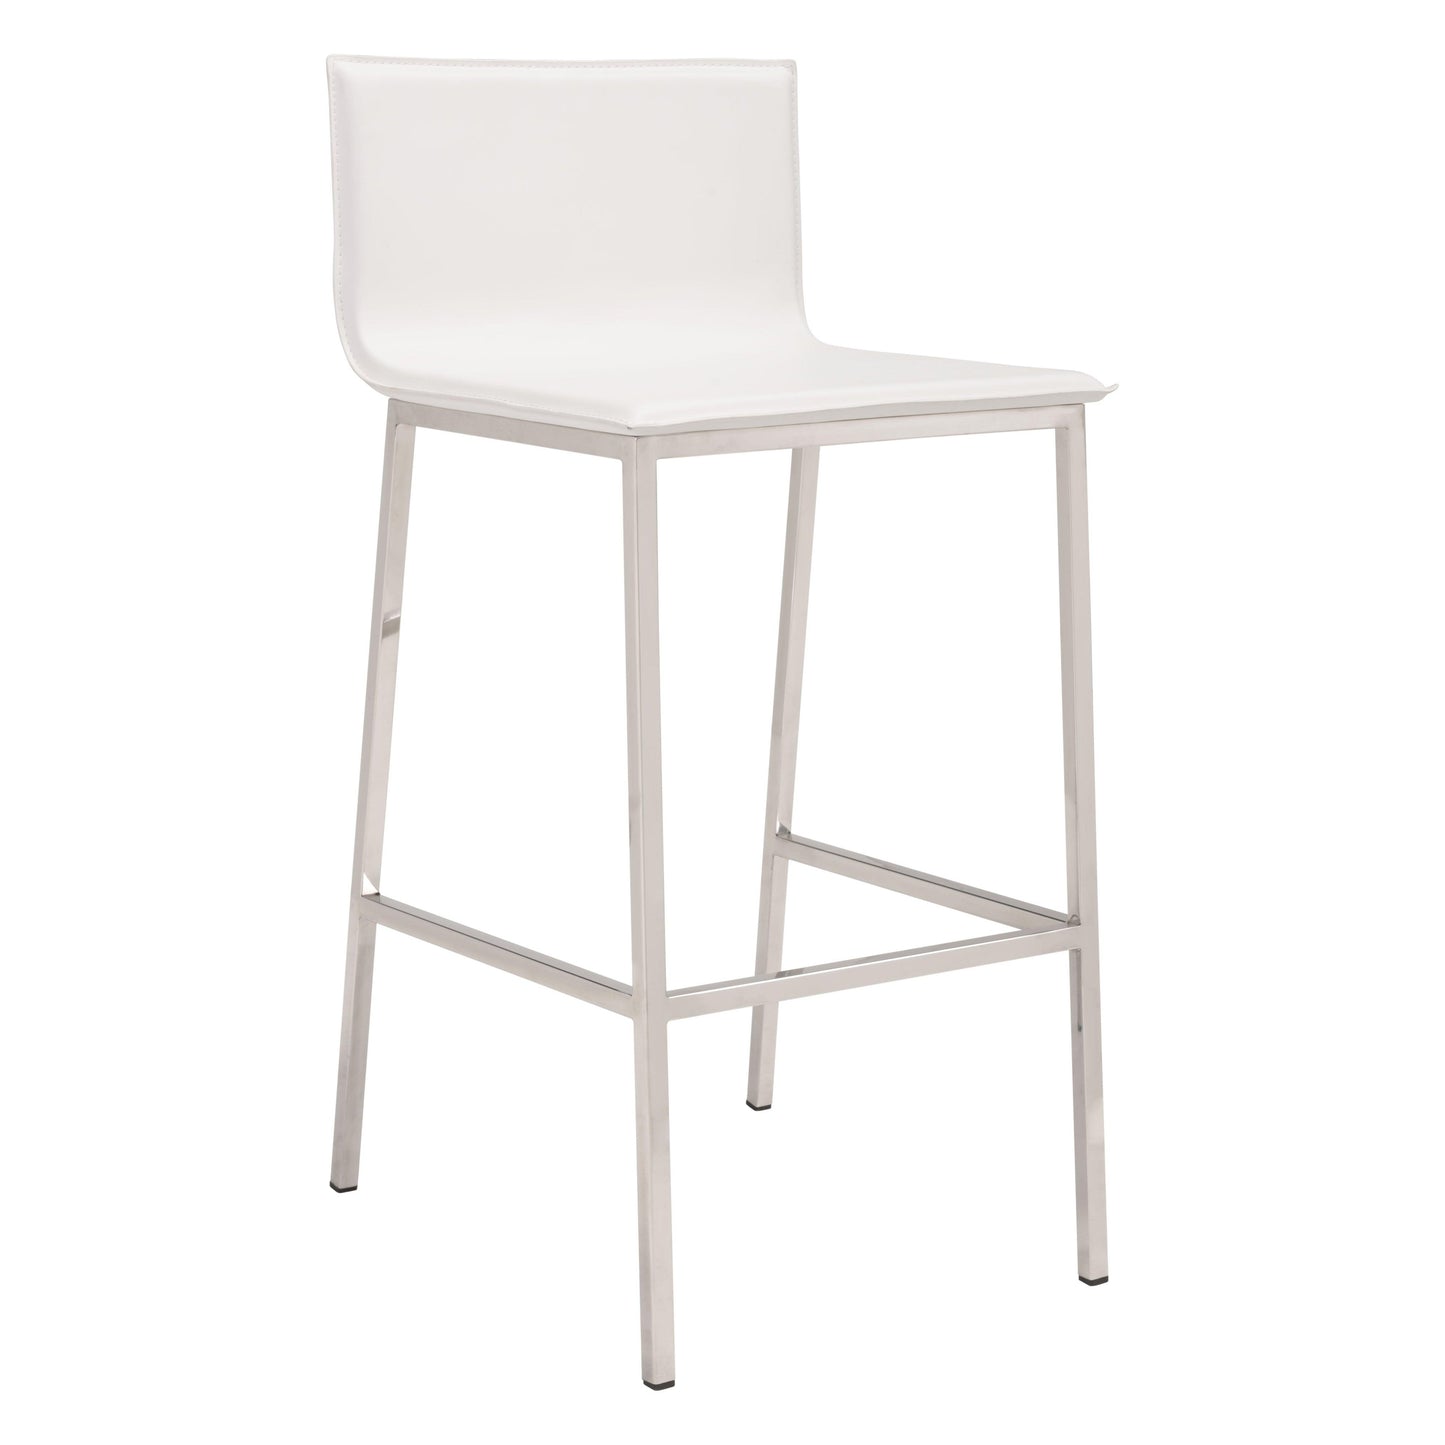 Marina Barstool (Set of 2) White - Sideboards and Things Back Type_With Back, Brand_Zuo Modern, Color_Silver, Color_White, Depth_20-30, Height_30-40, Materials_Metal, Materials_Upholstery, Metal Type_Steel, Number of Pieces_2PC Set, Product Type_Bar Height, Upholstery Type_Leather, Upholstery Type_Vegan Leather, Width_10-20